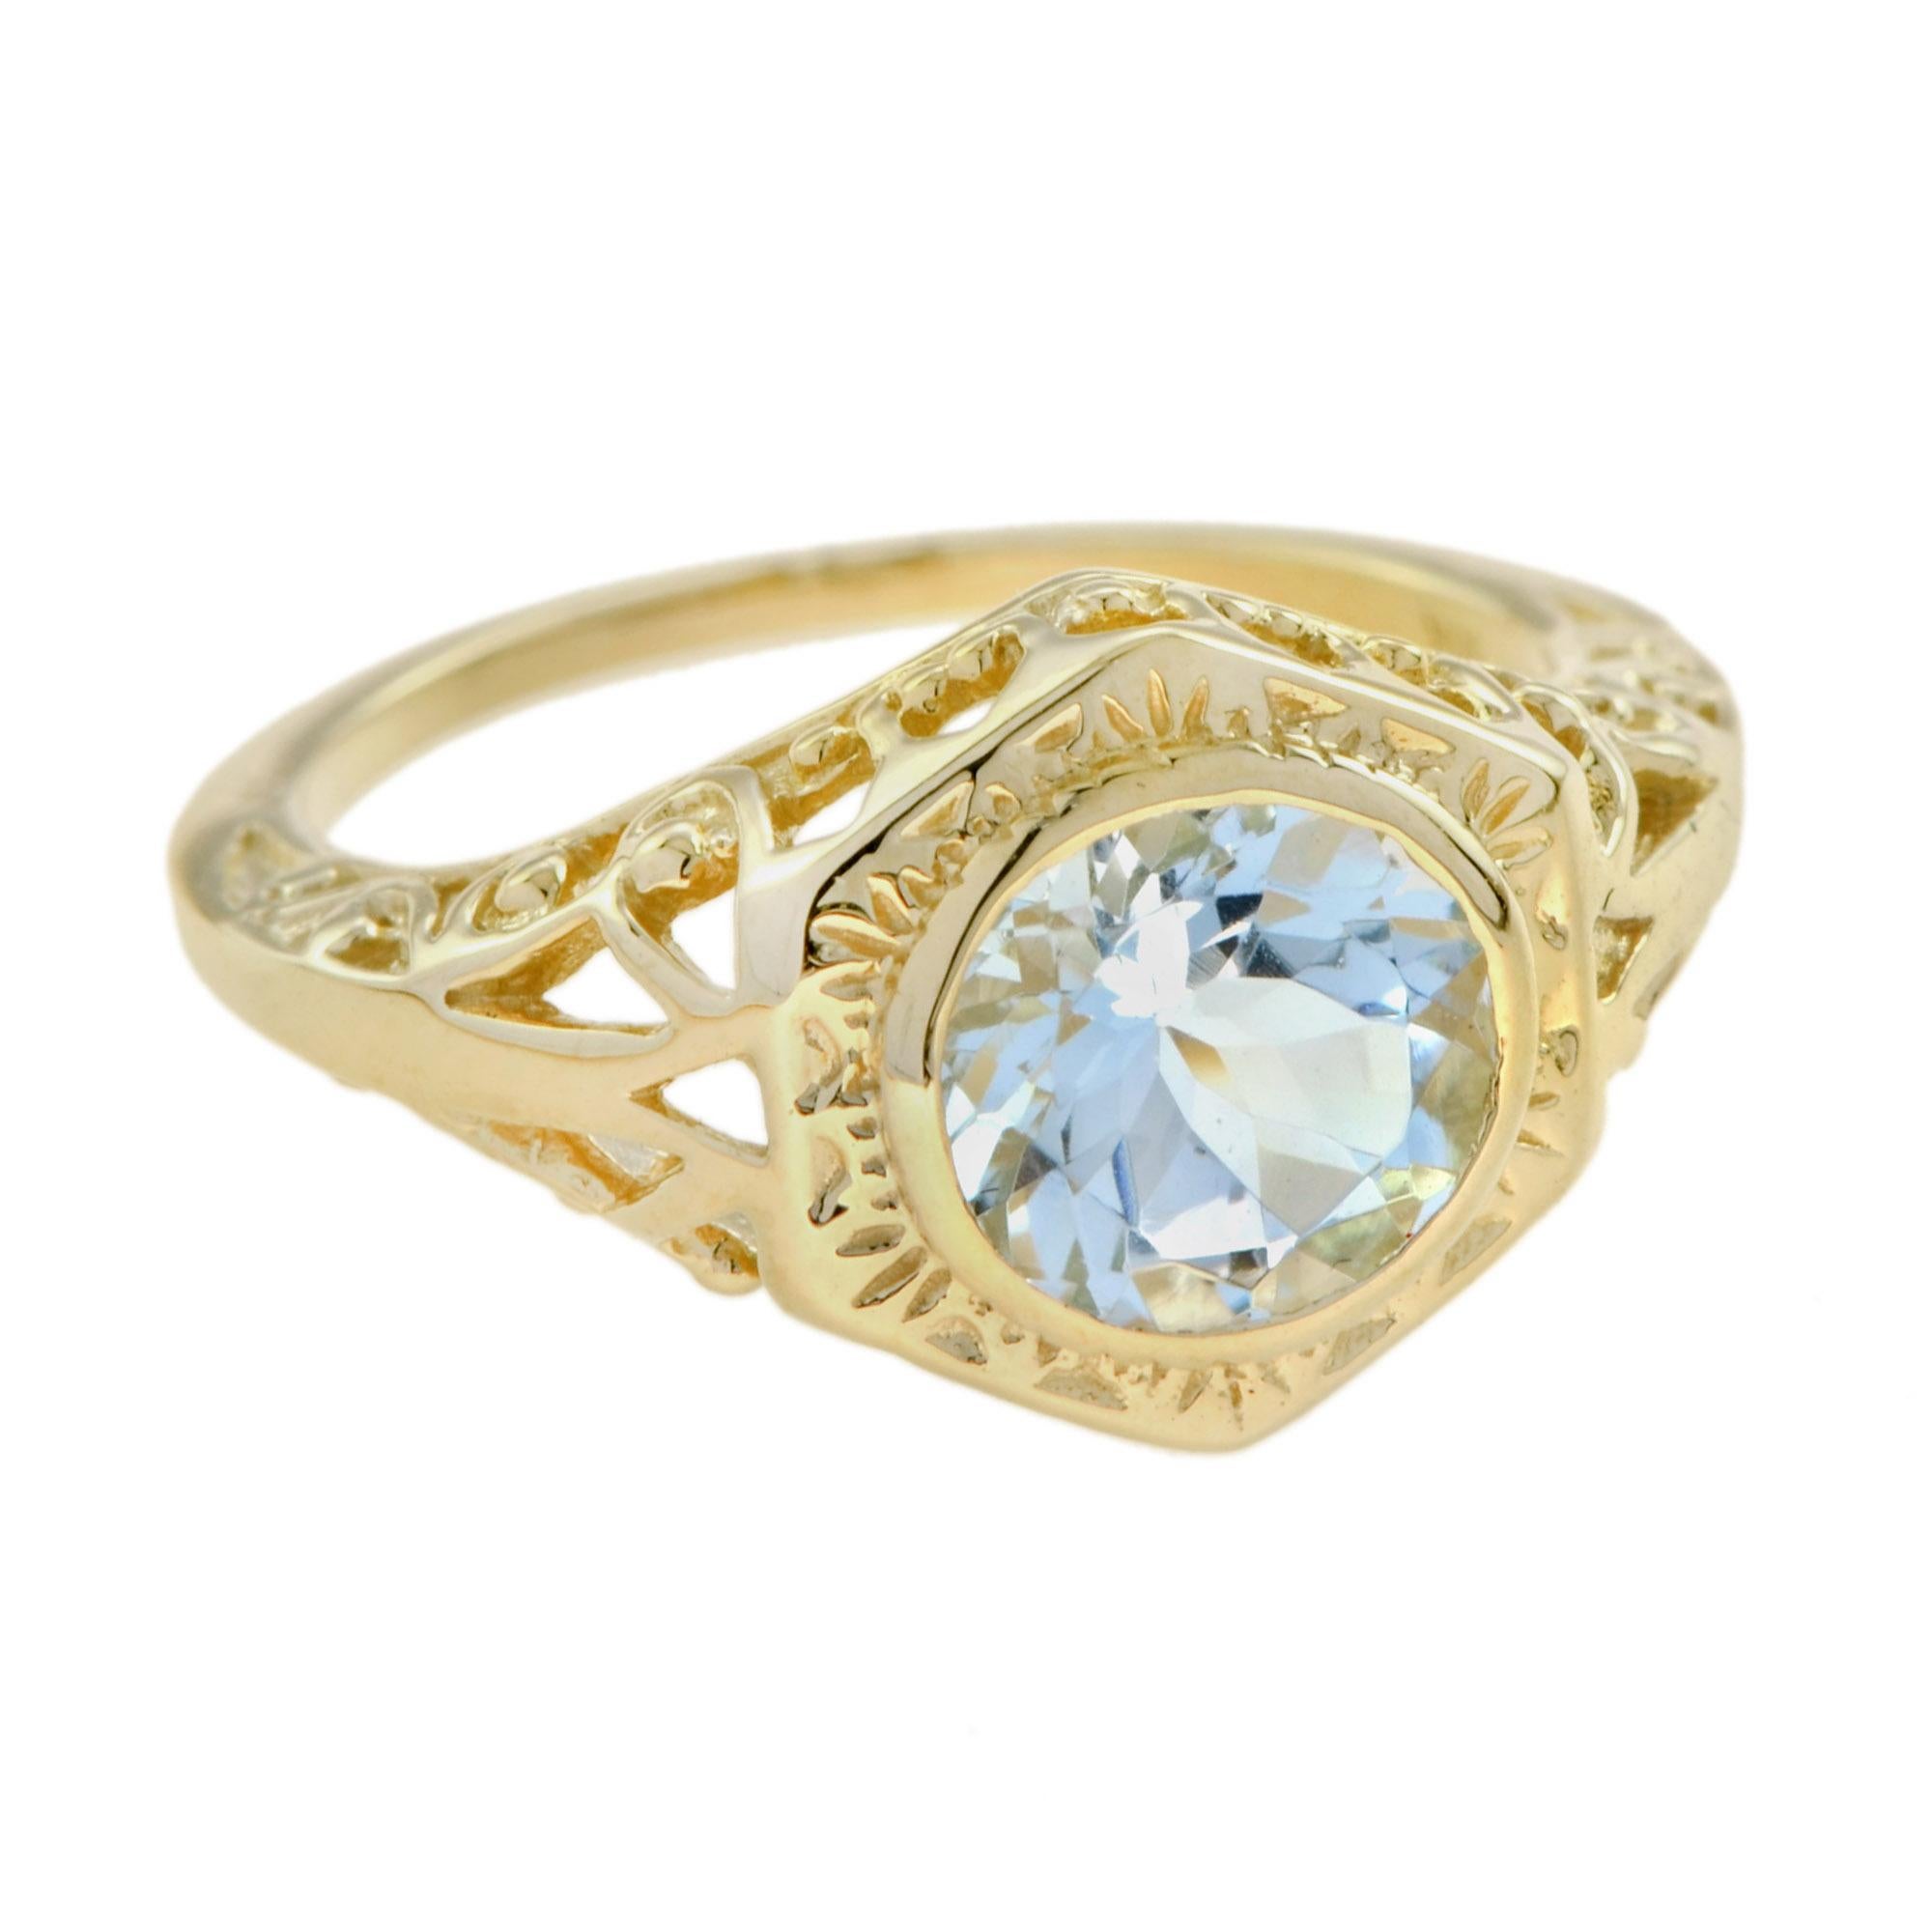 Crafted in 18K yellow gold, this gorgeous vintage style Art Deco filigree aquamarine engagement ring features a shimmery blue natural aquamarine of 0.85 carats, set in a secure bezel-set concentric hexagonal filigree setting. A great choice for